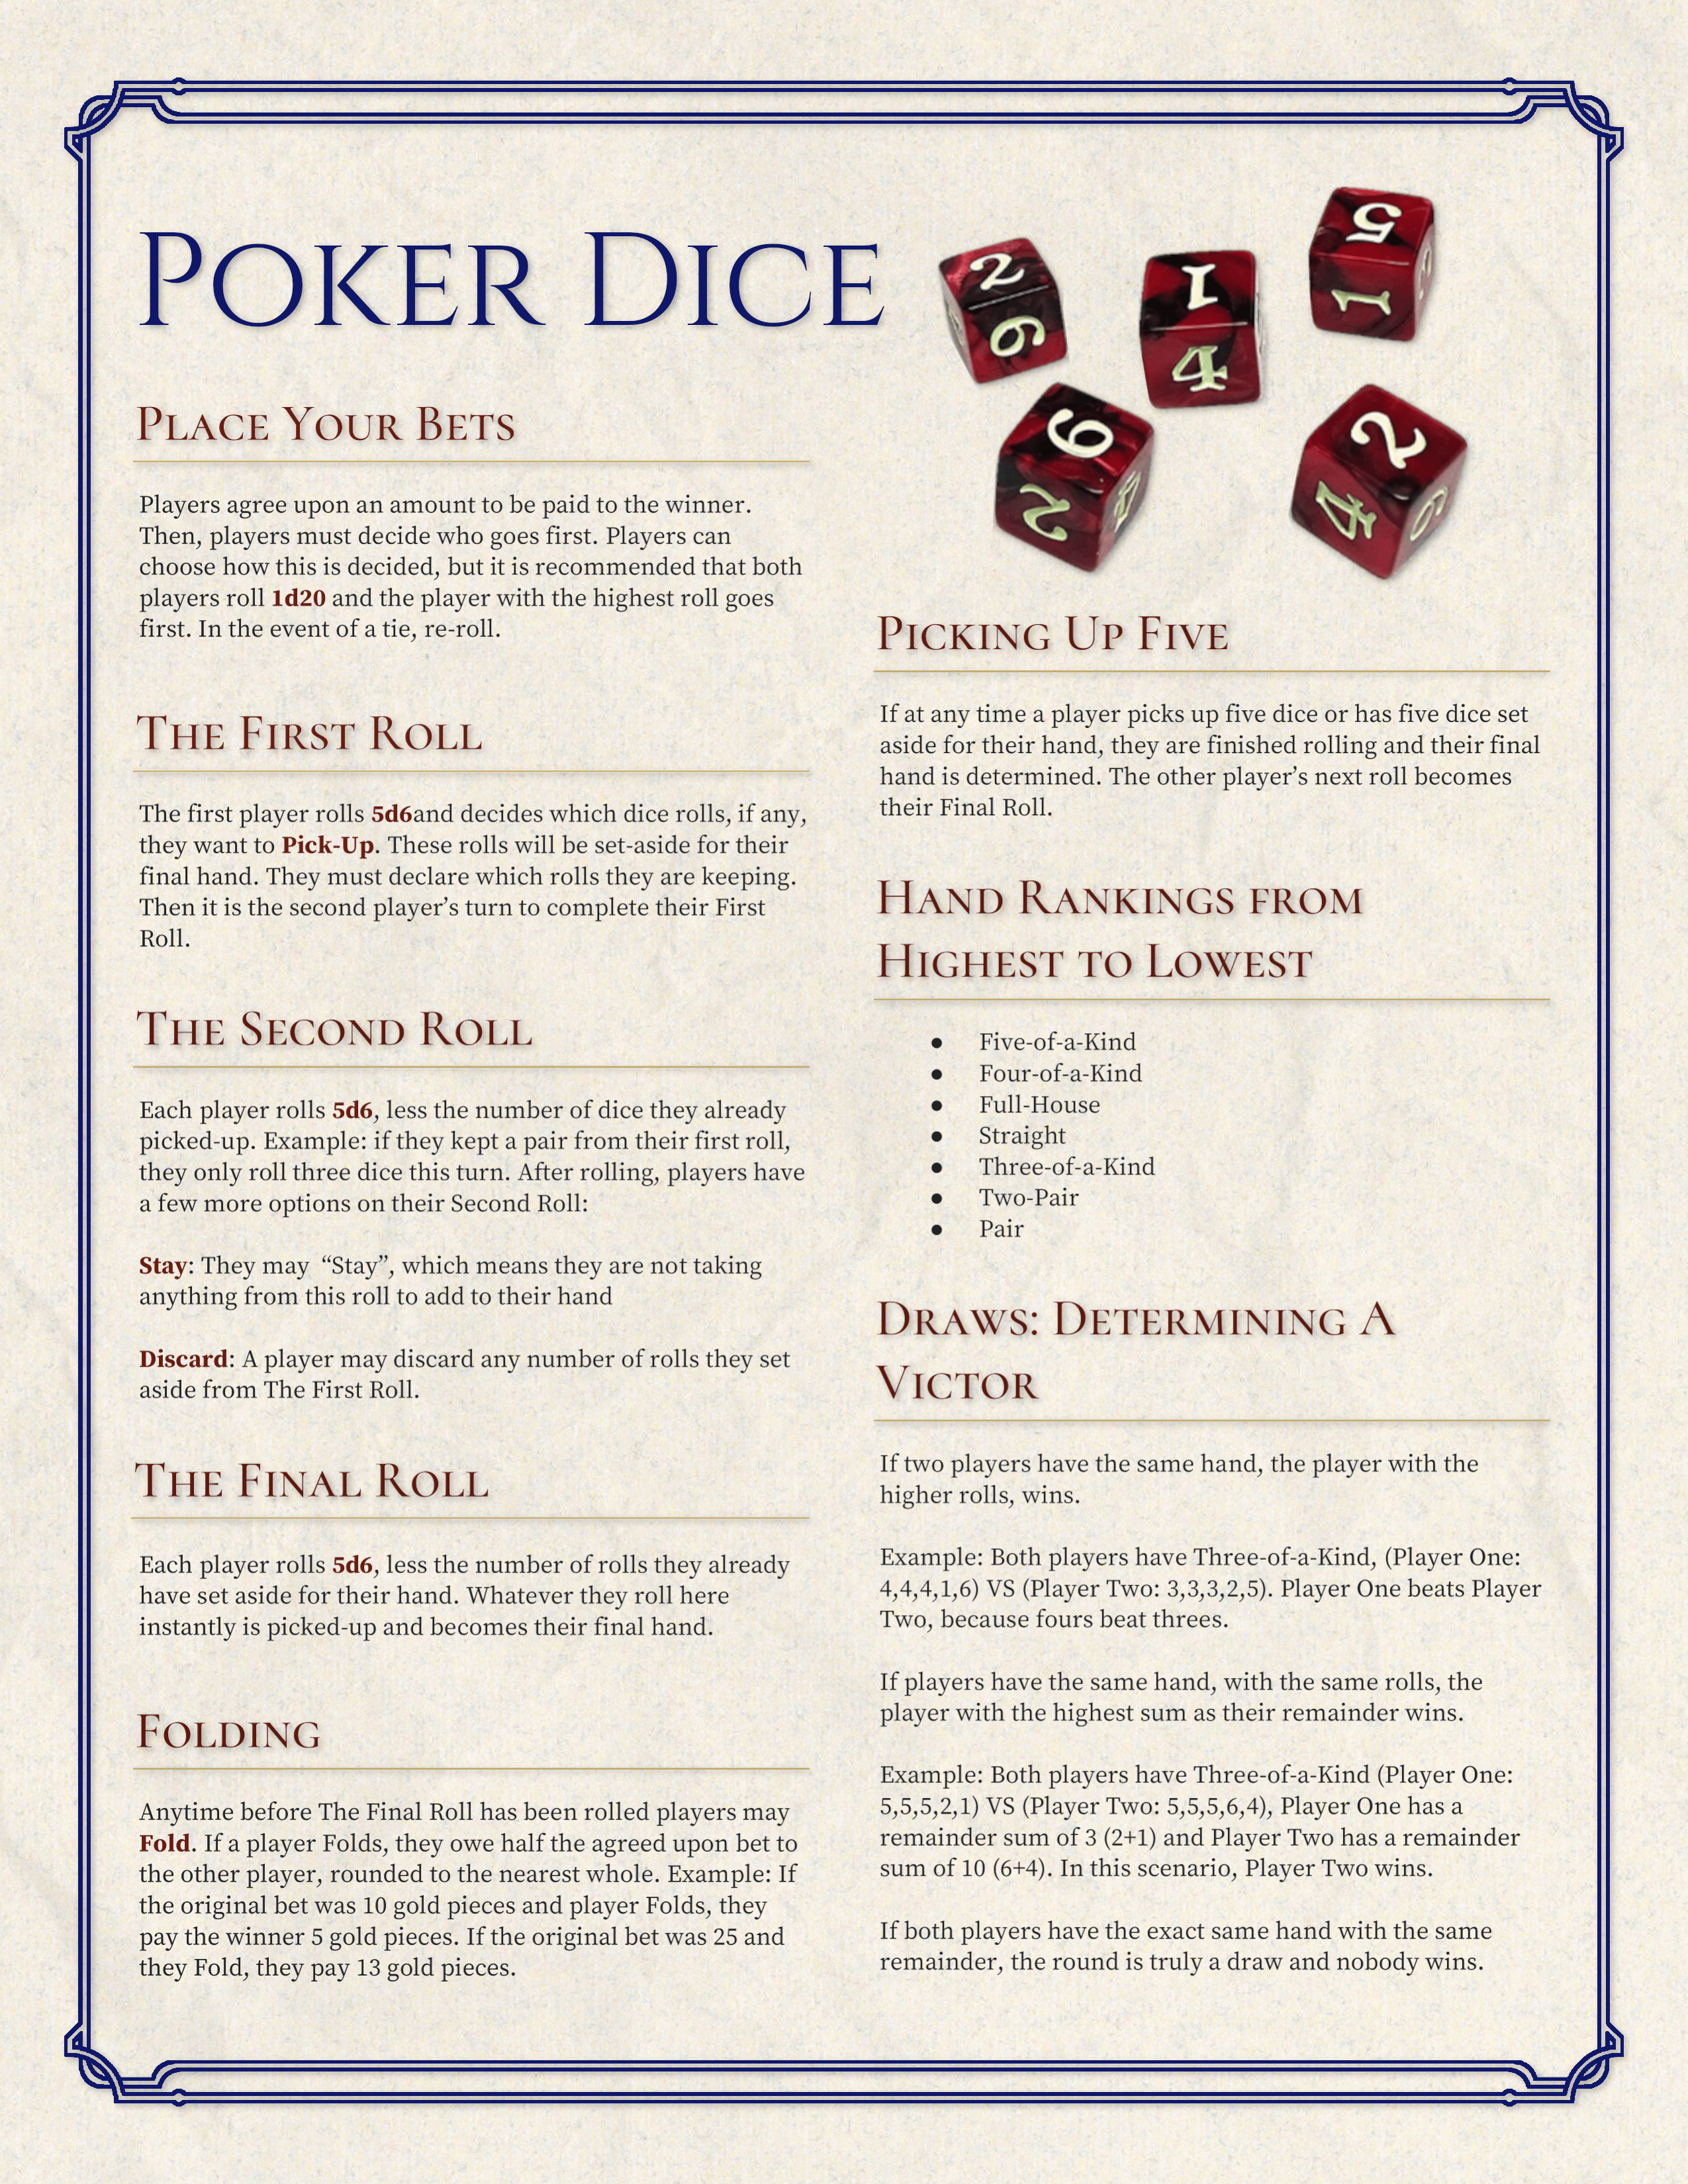 The Impact of Music on Poker Dice Gameplay.